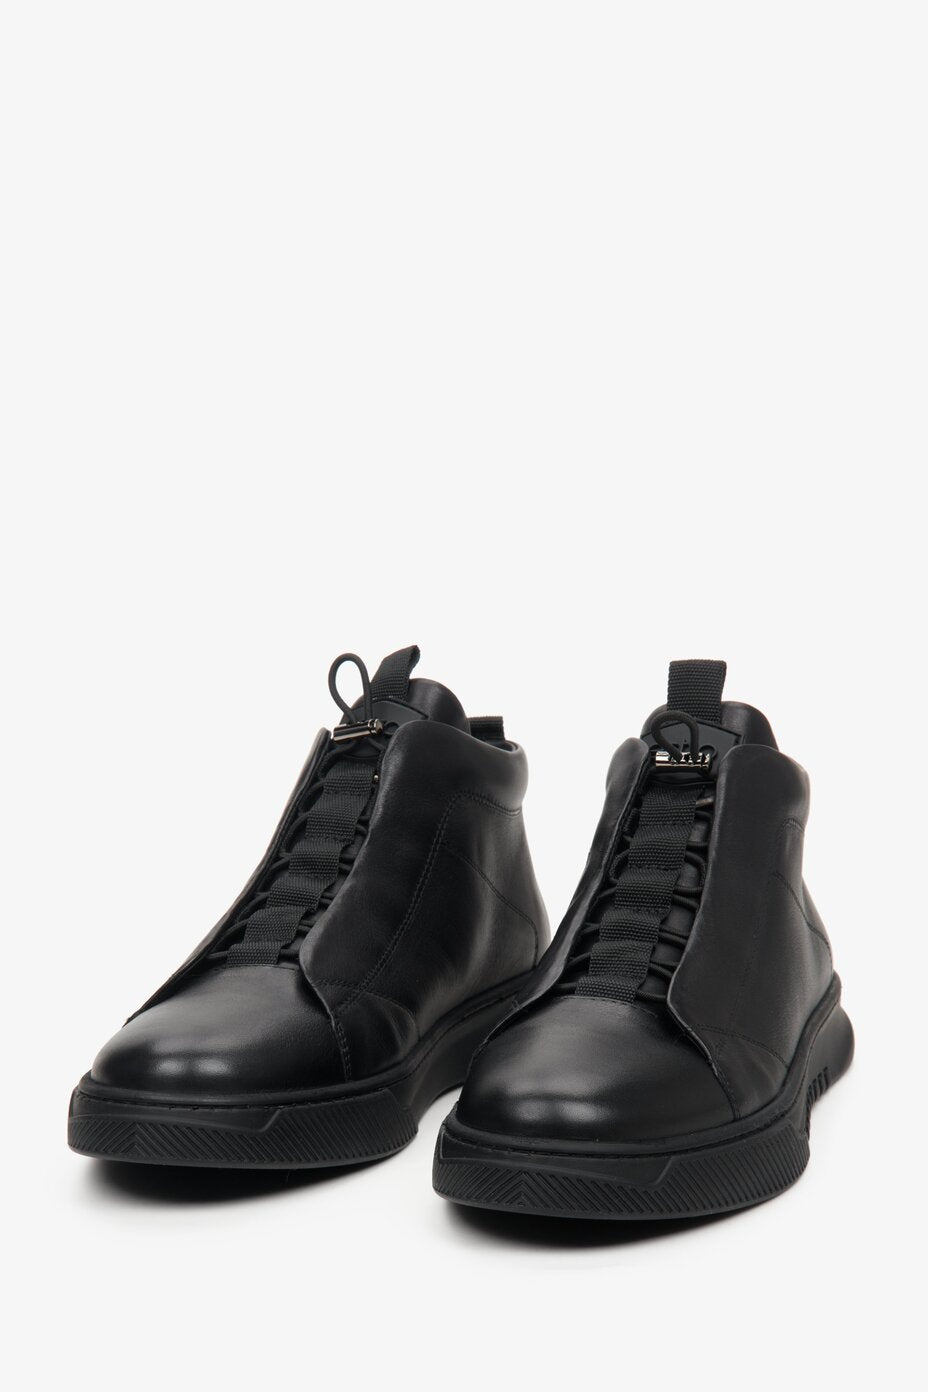 Estro brand black men's leather ankle boots with a turnbuckle - presentation of shoe toe.